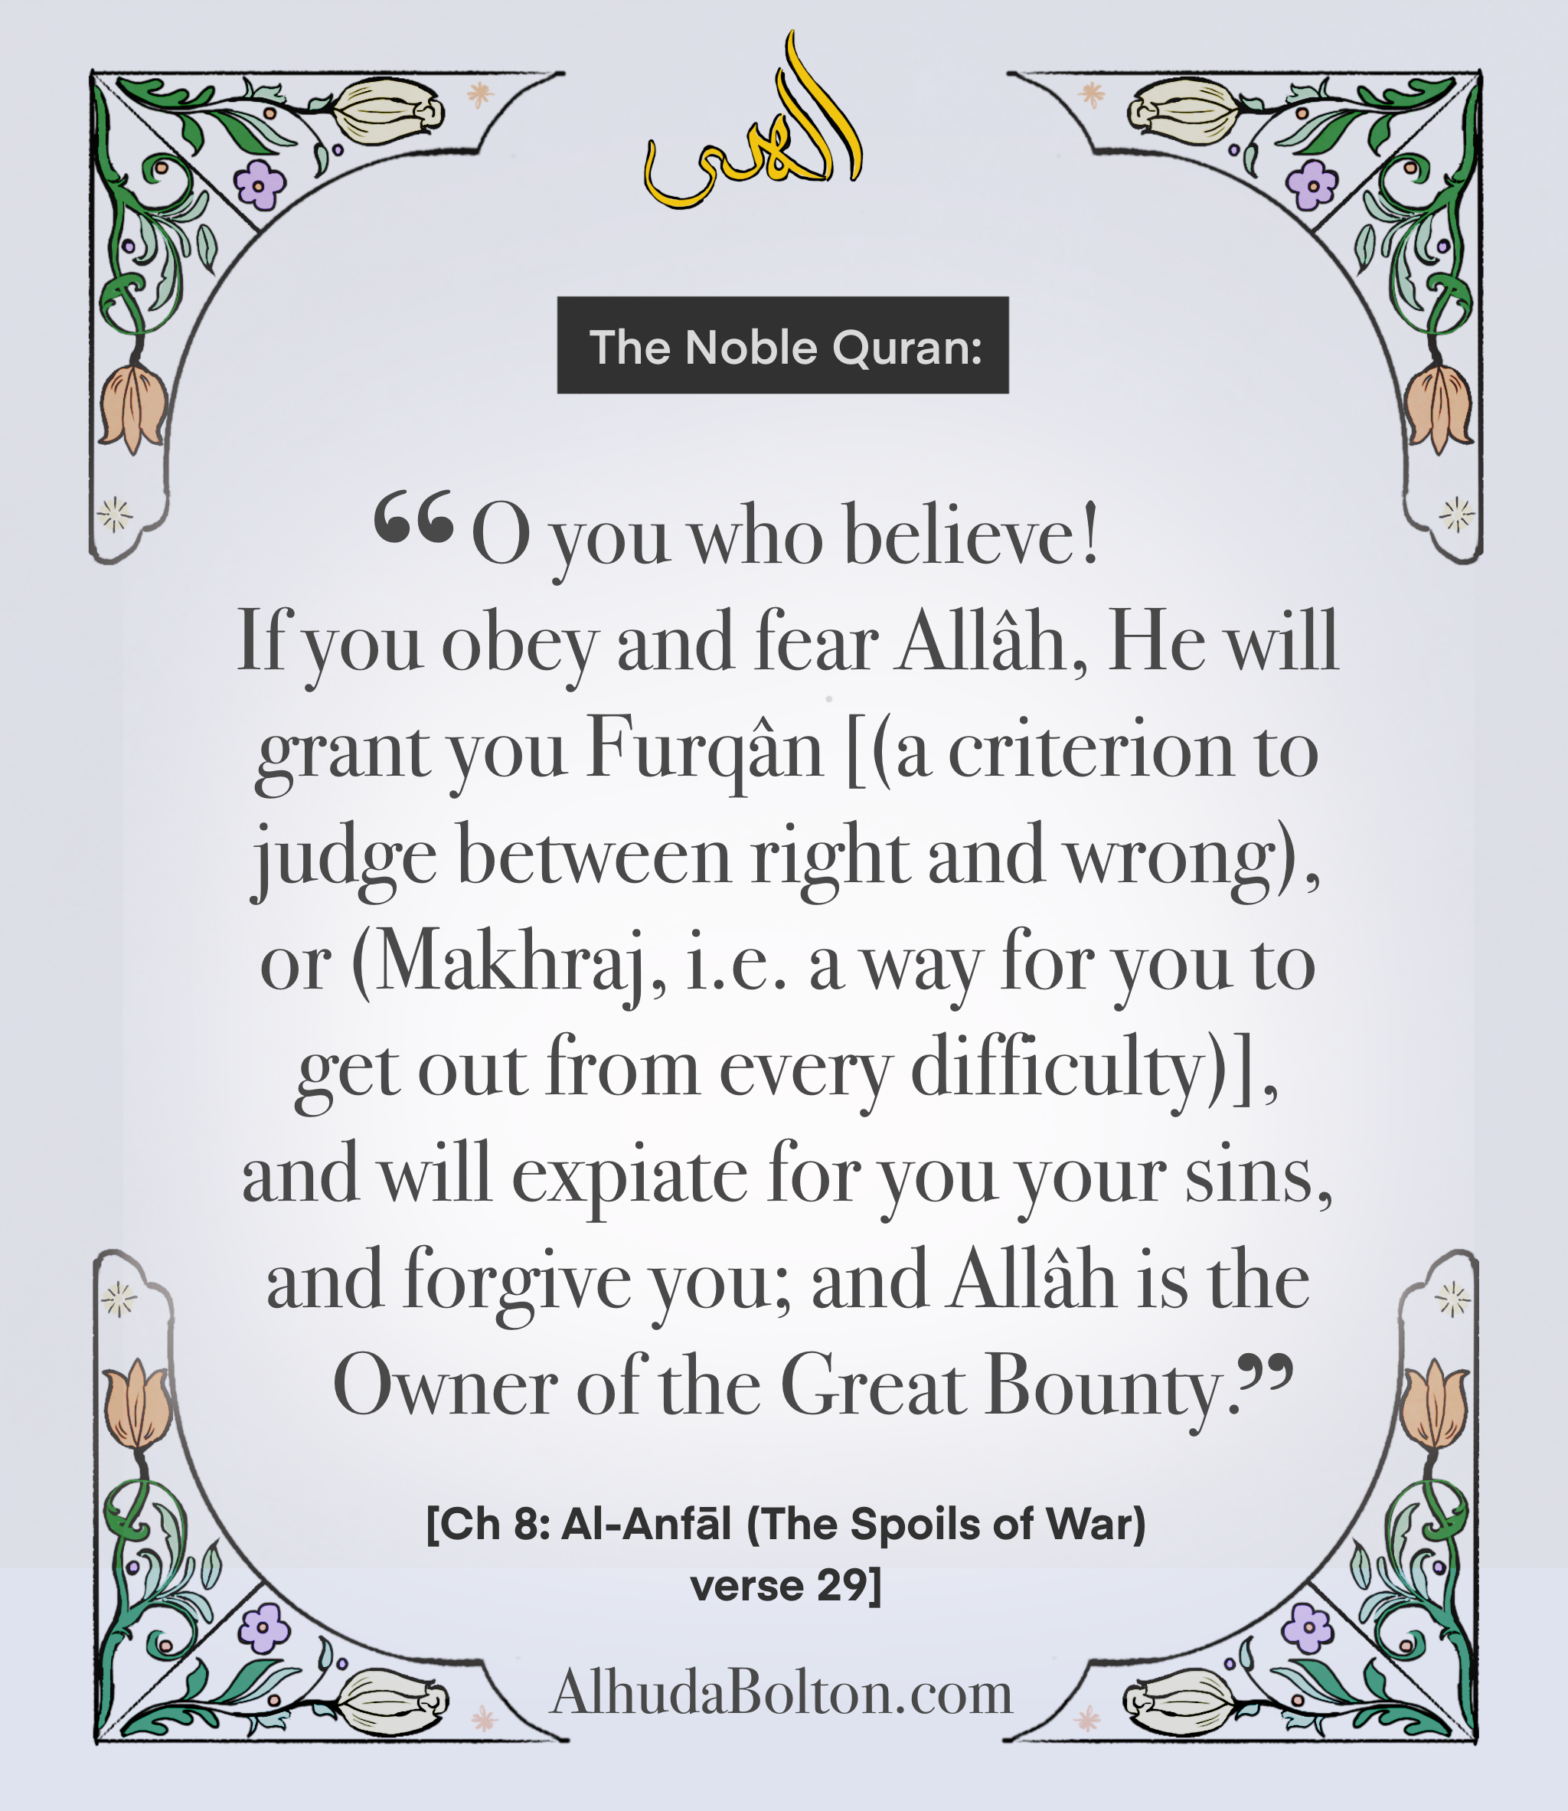 Quran: “if you obey & fear Allah…”